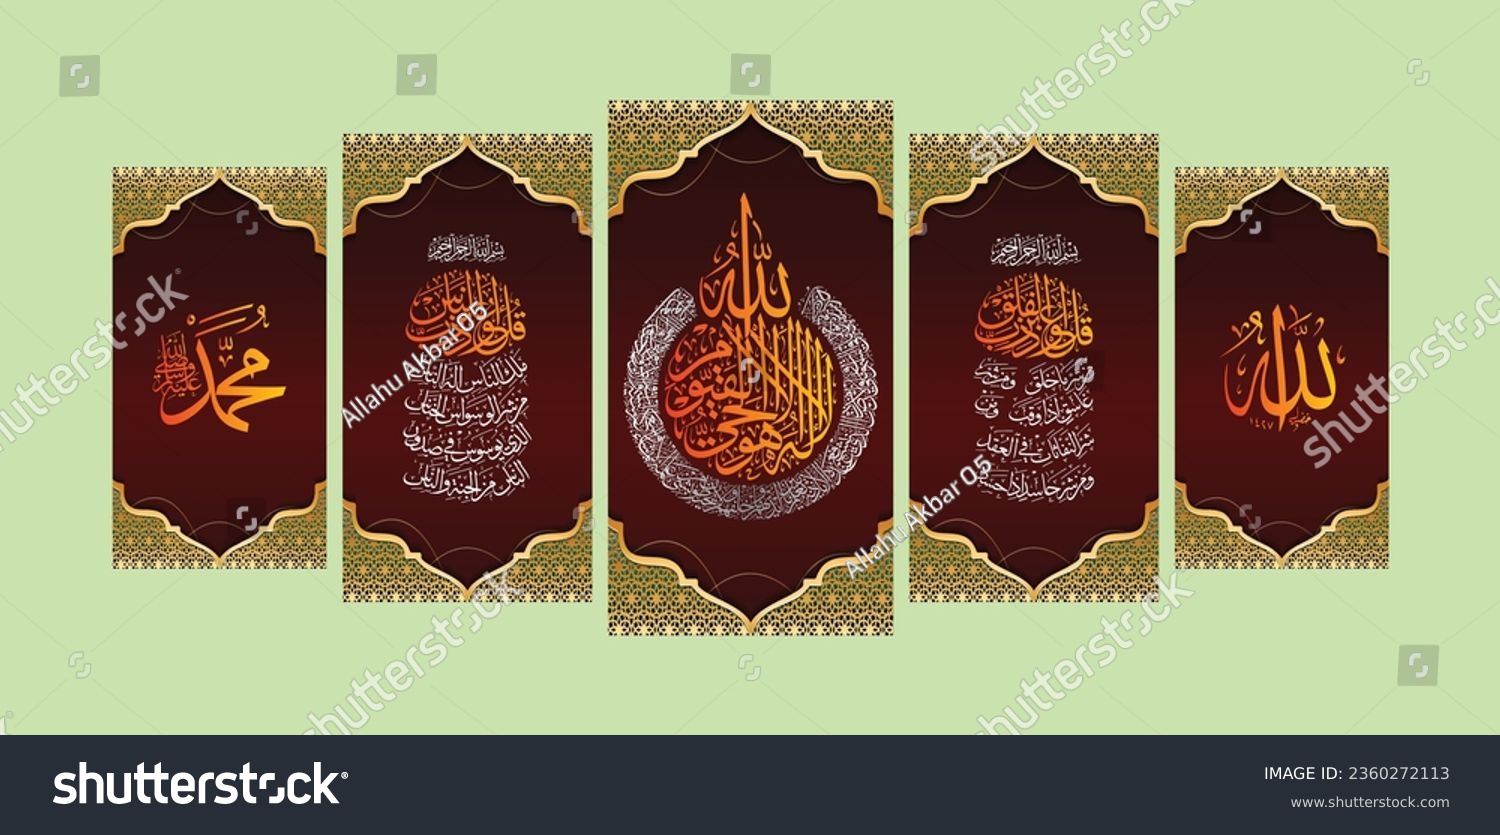 SVG of Beautiful wall portraits combination of Arabic calligraphy 